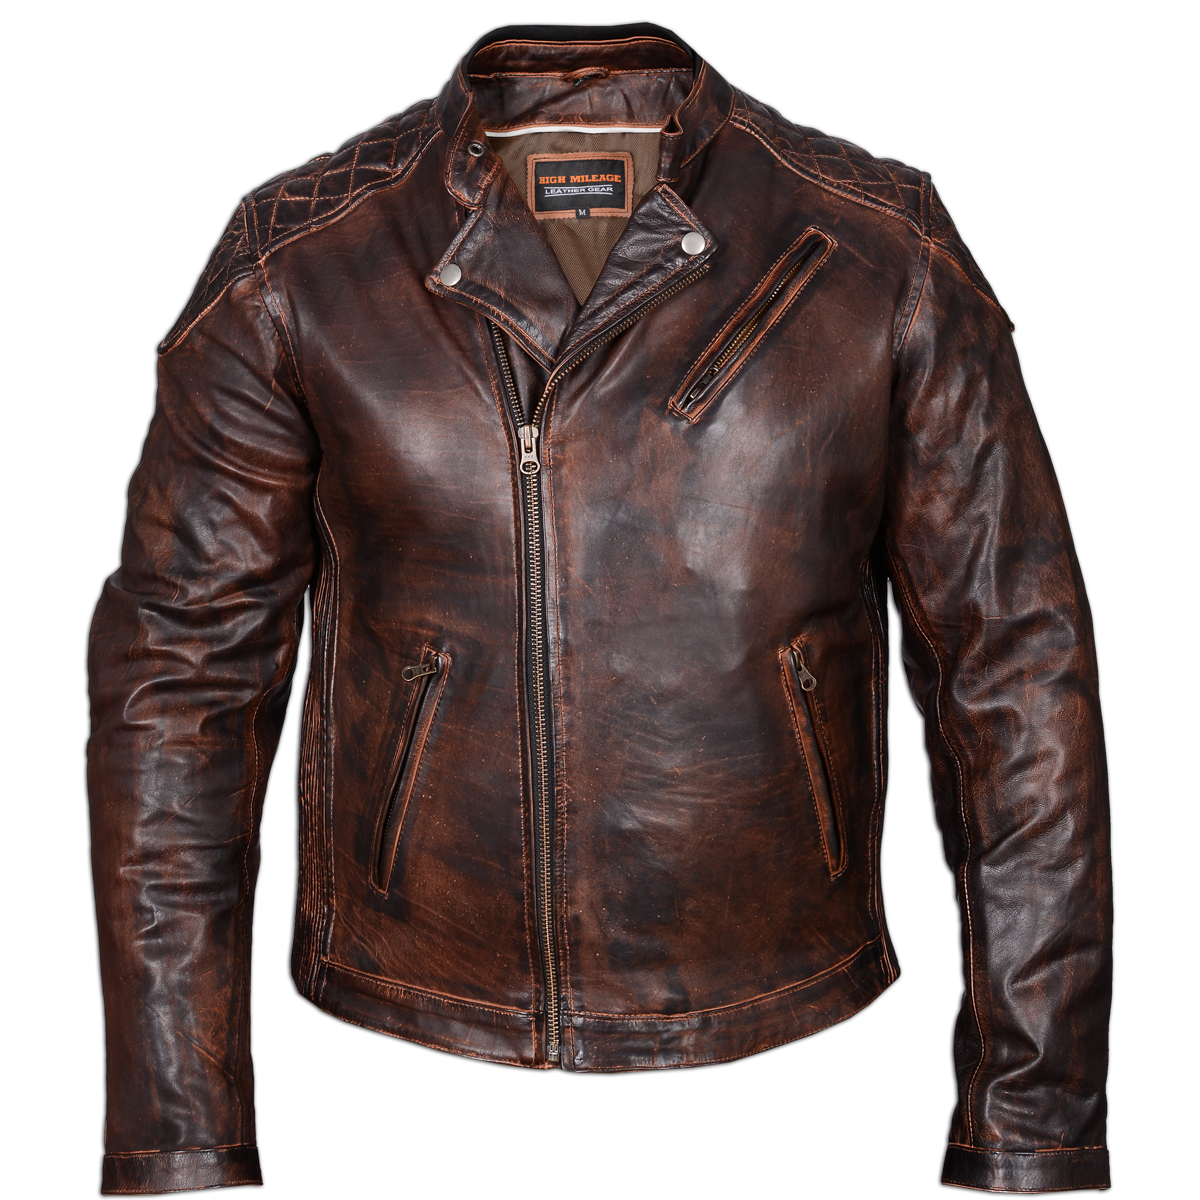 Vance Leather High Mileage Men's Vintage Brown Leather Jacket with Diamond Stitched Shoulders